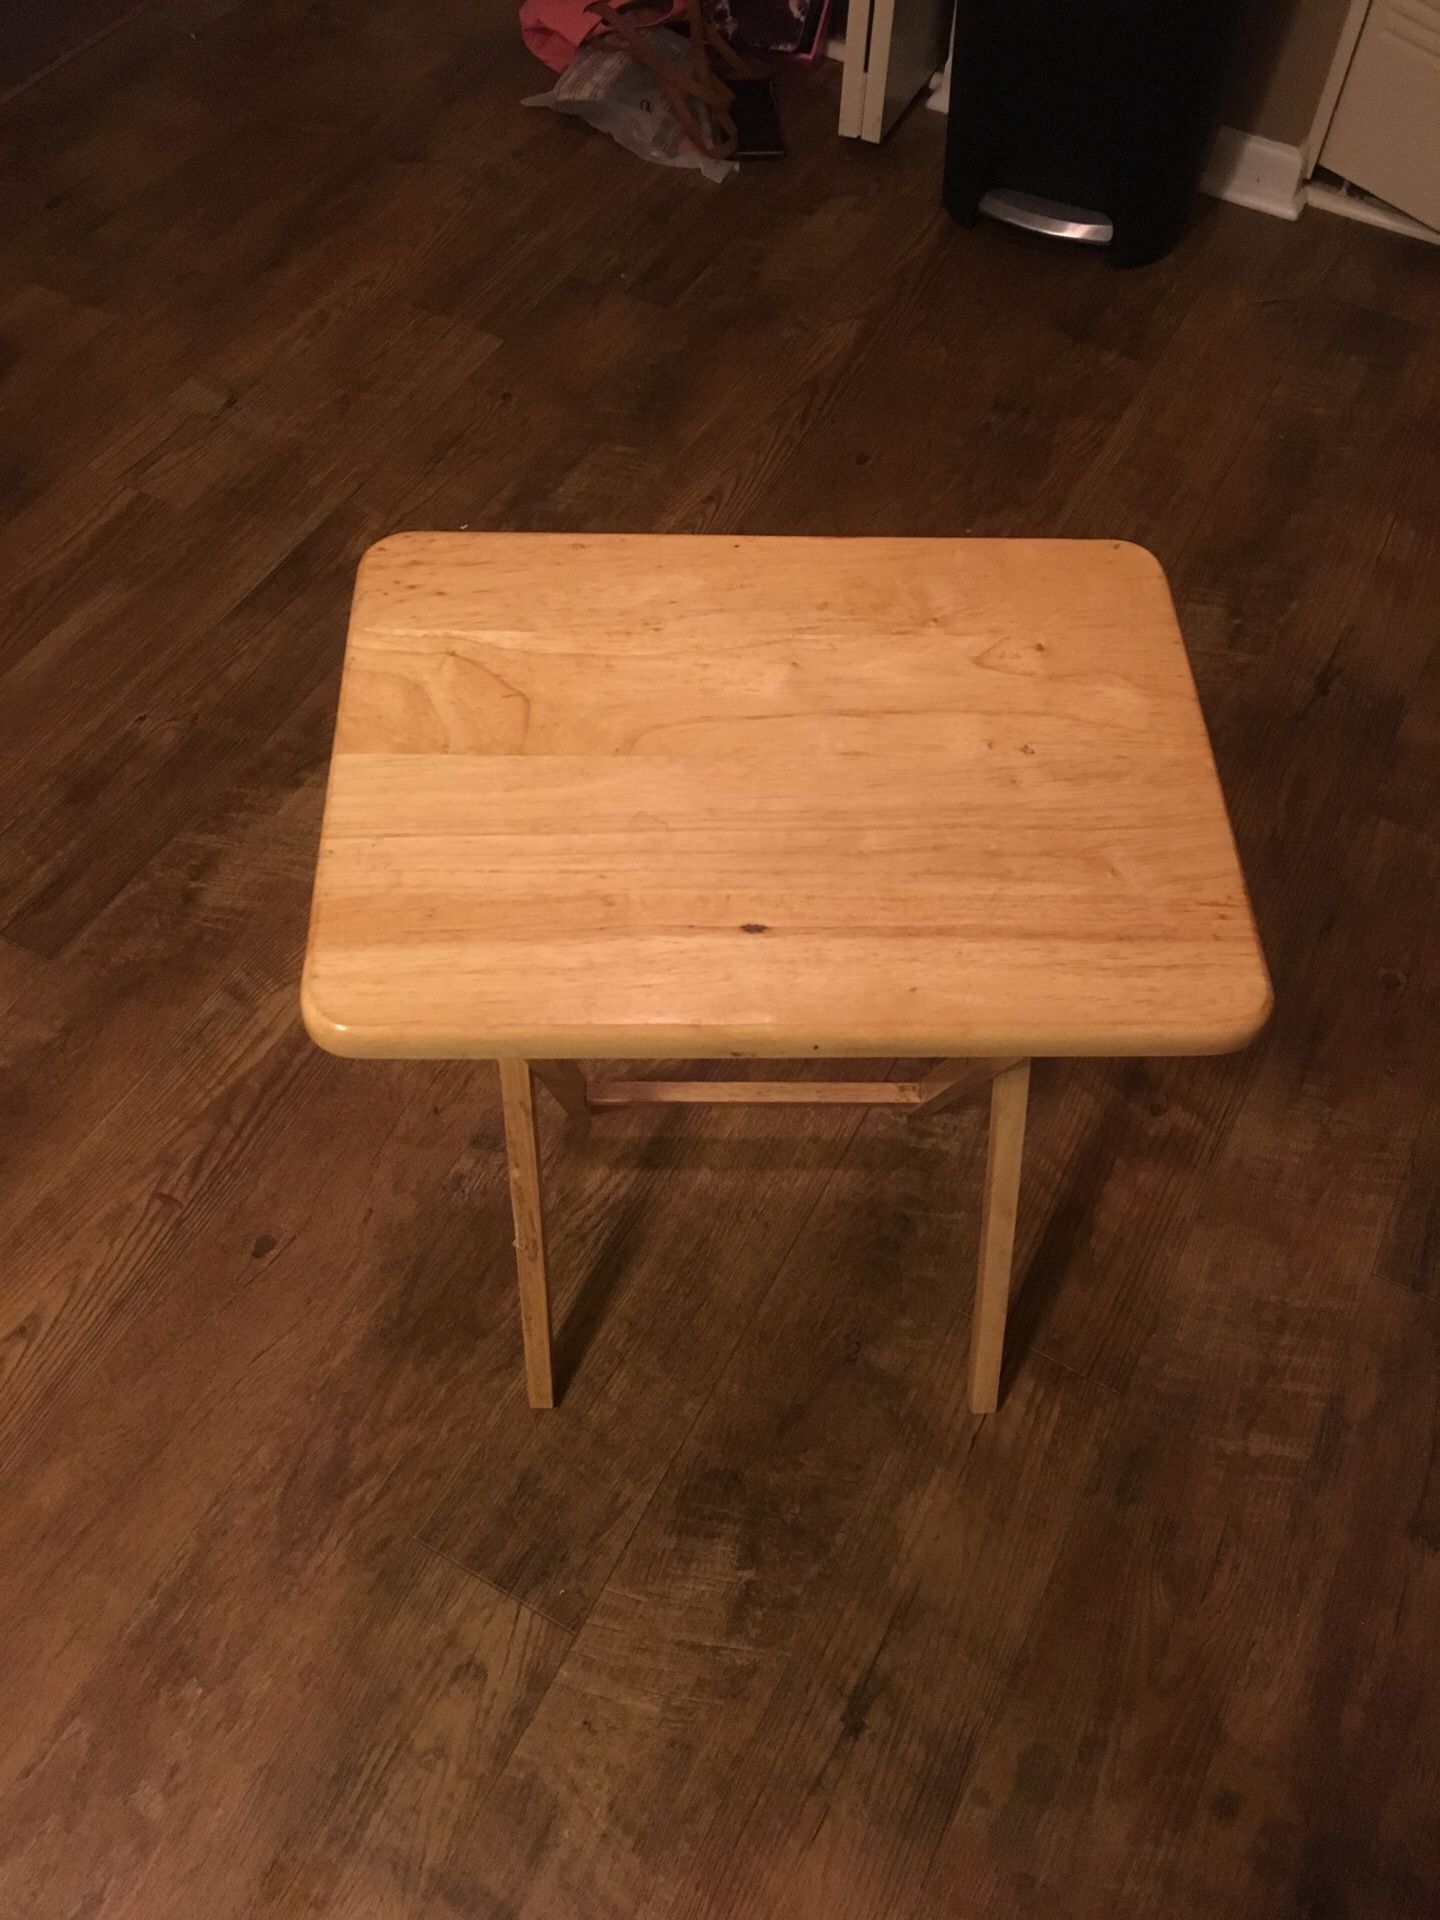 Small wooden desk and sturdy